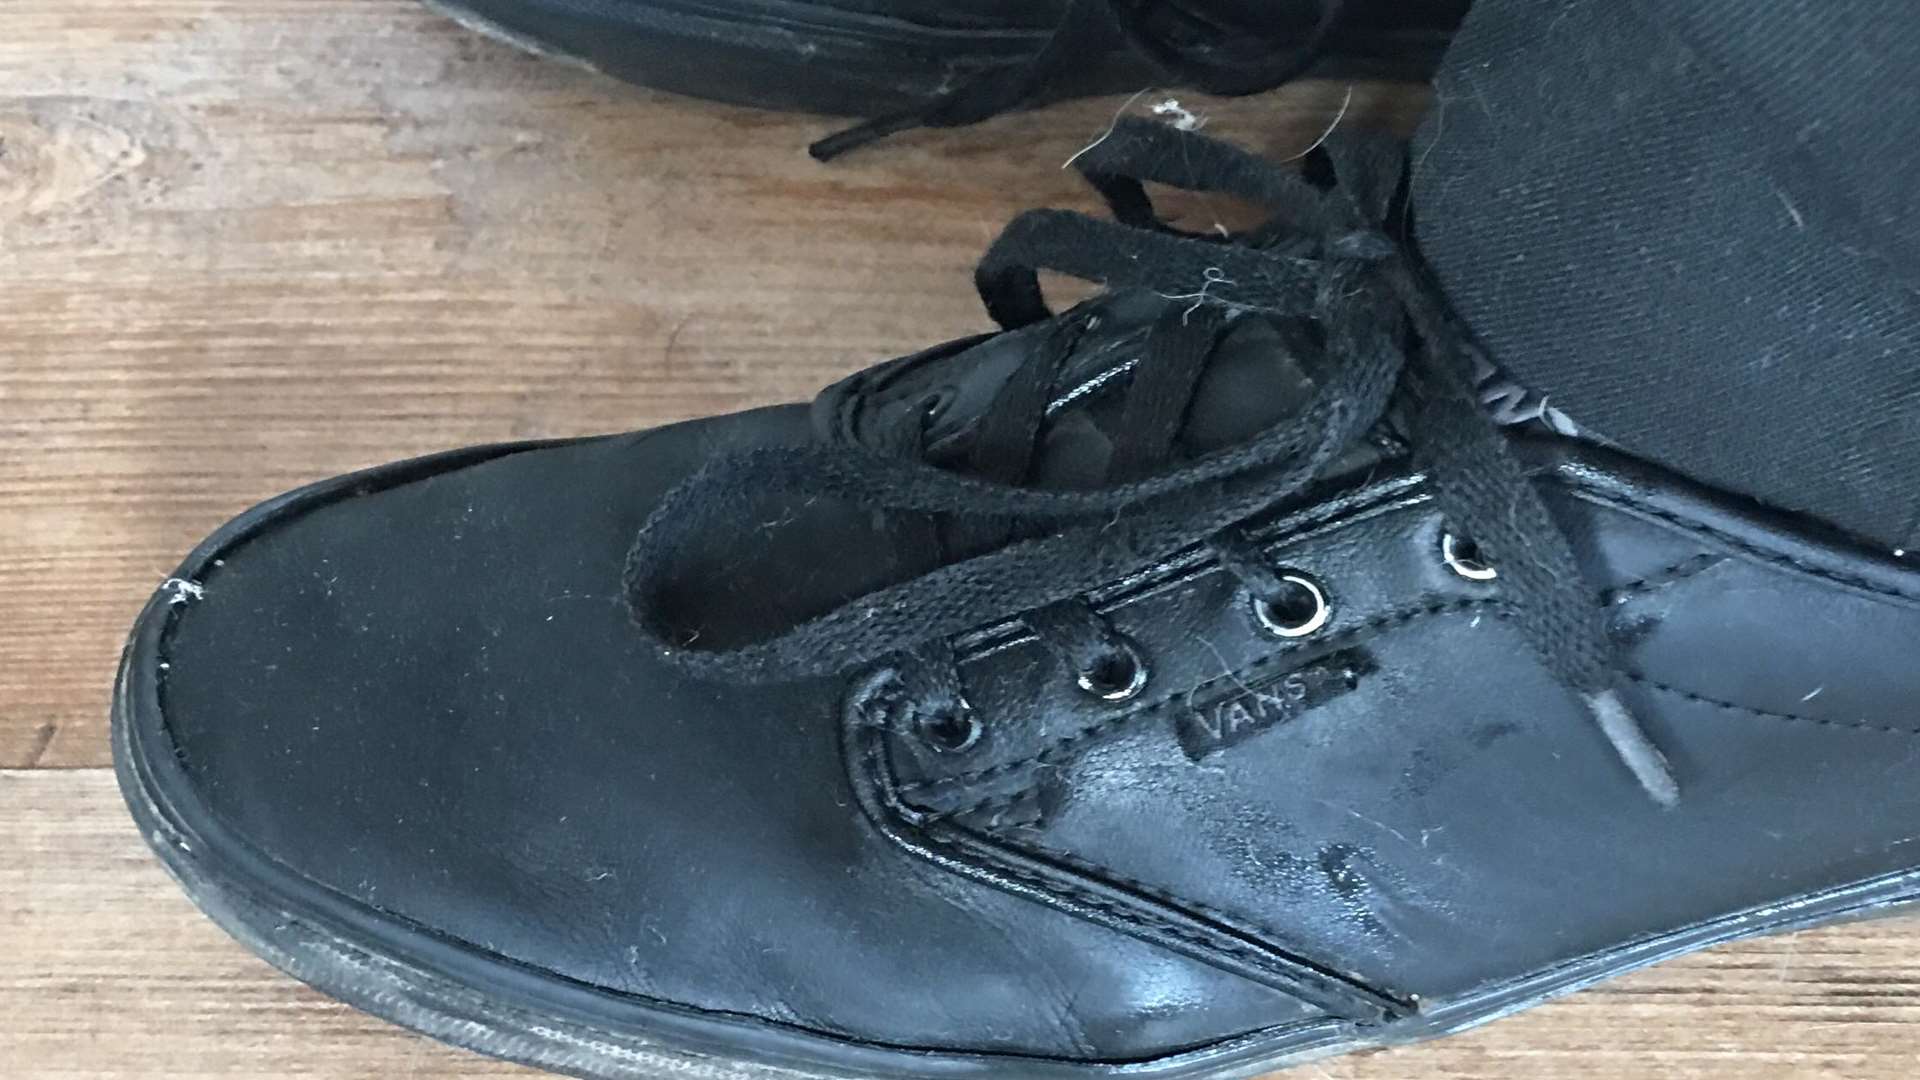 The lace-up Vans ruled unsuitable by Homewood School